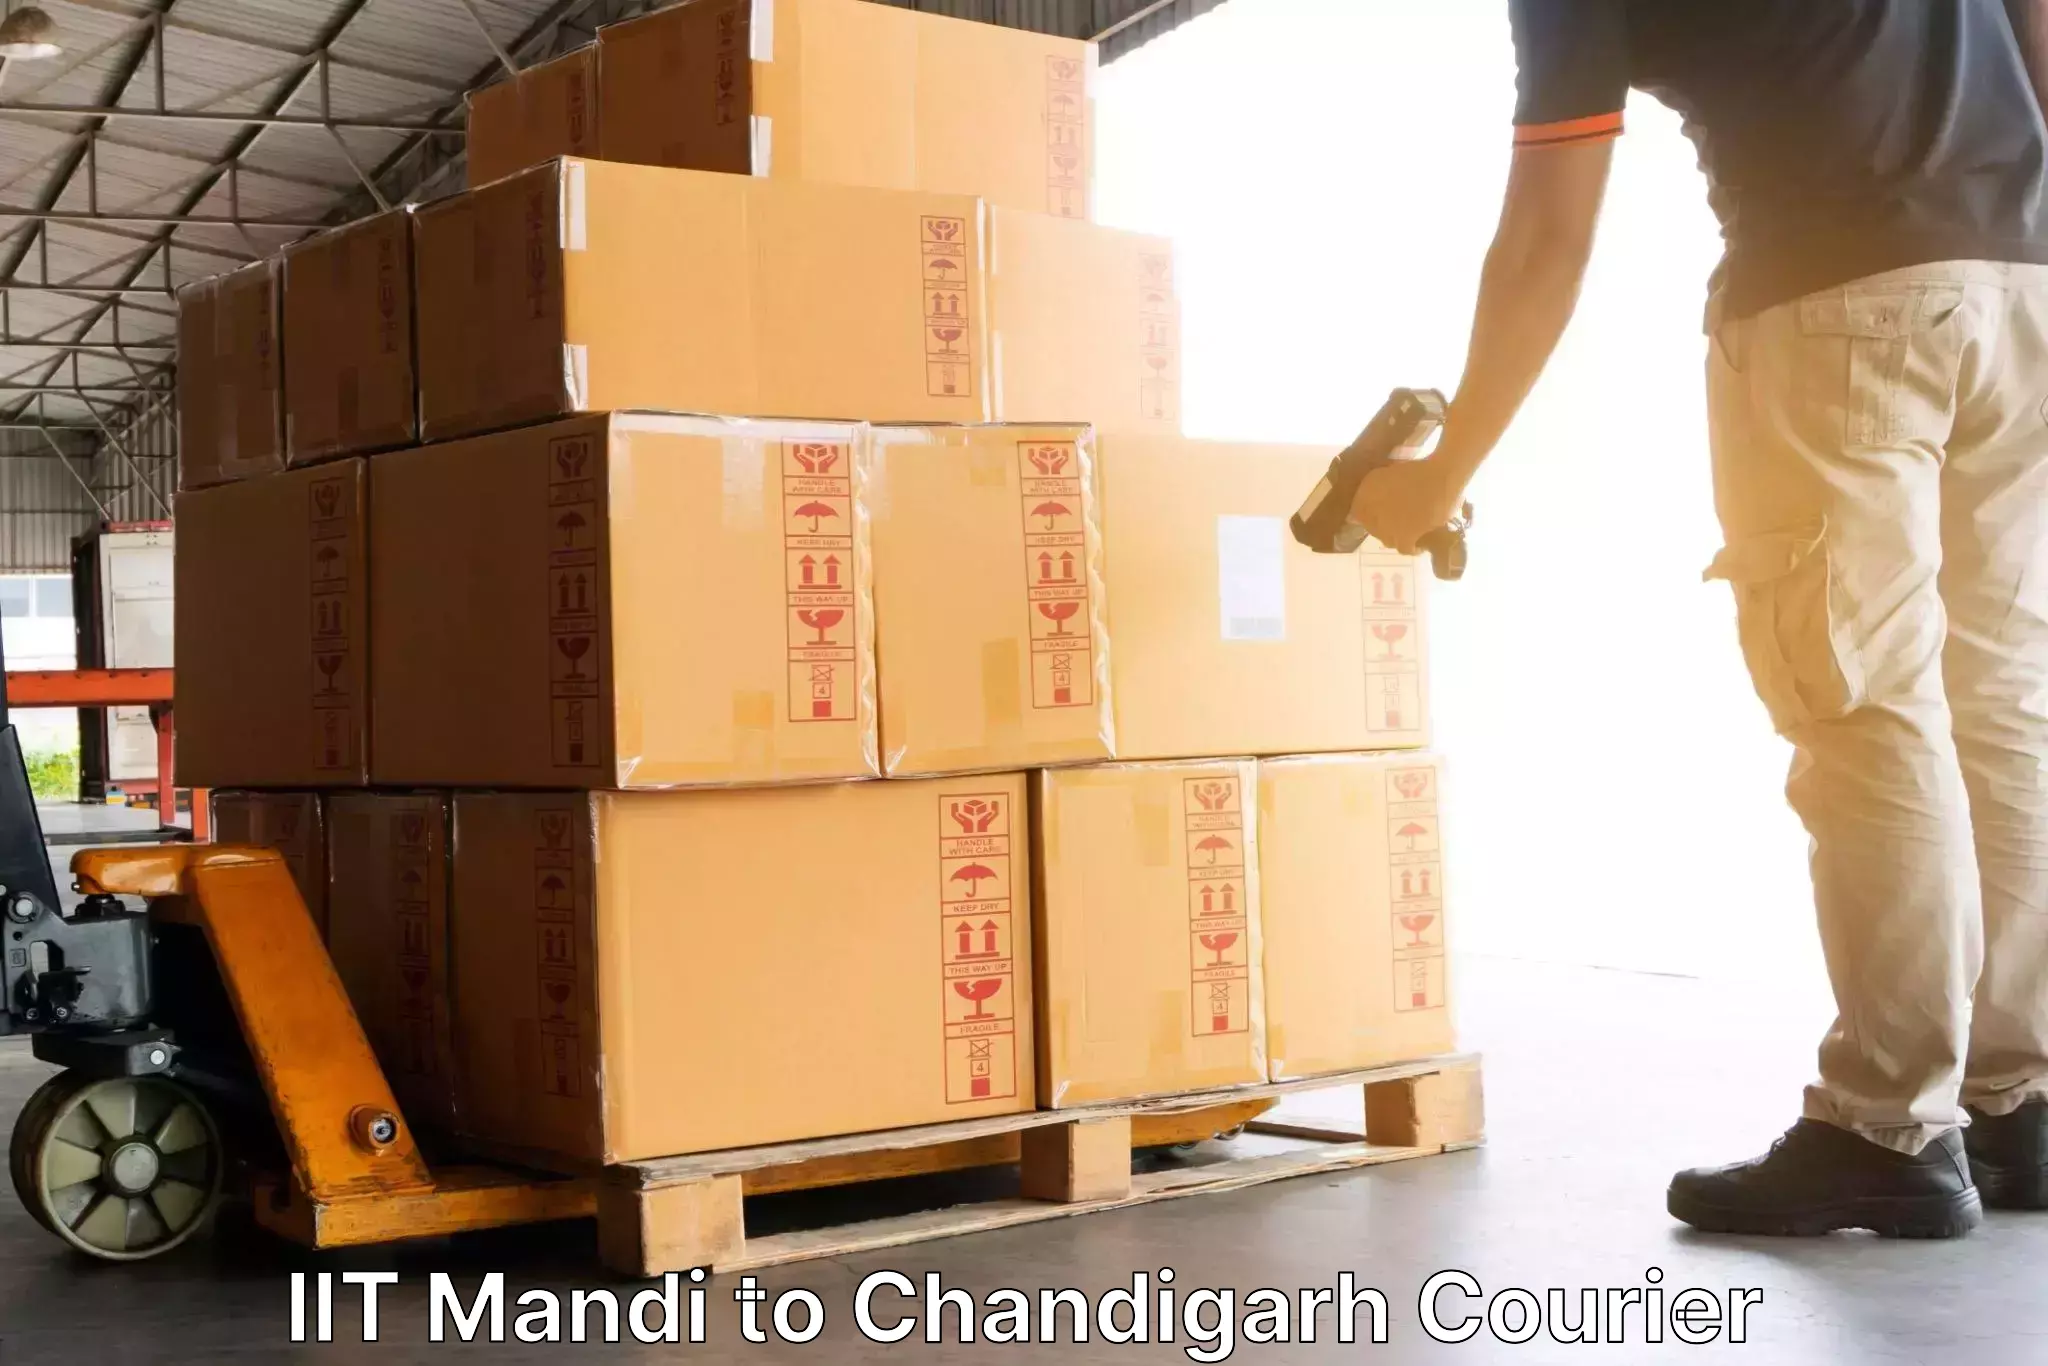 Courier rate comparison IIT Mandi to Chandigarh